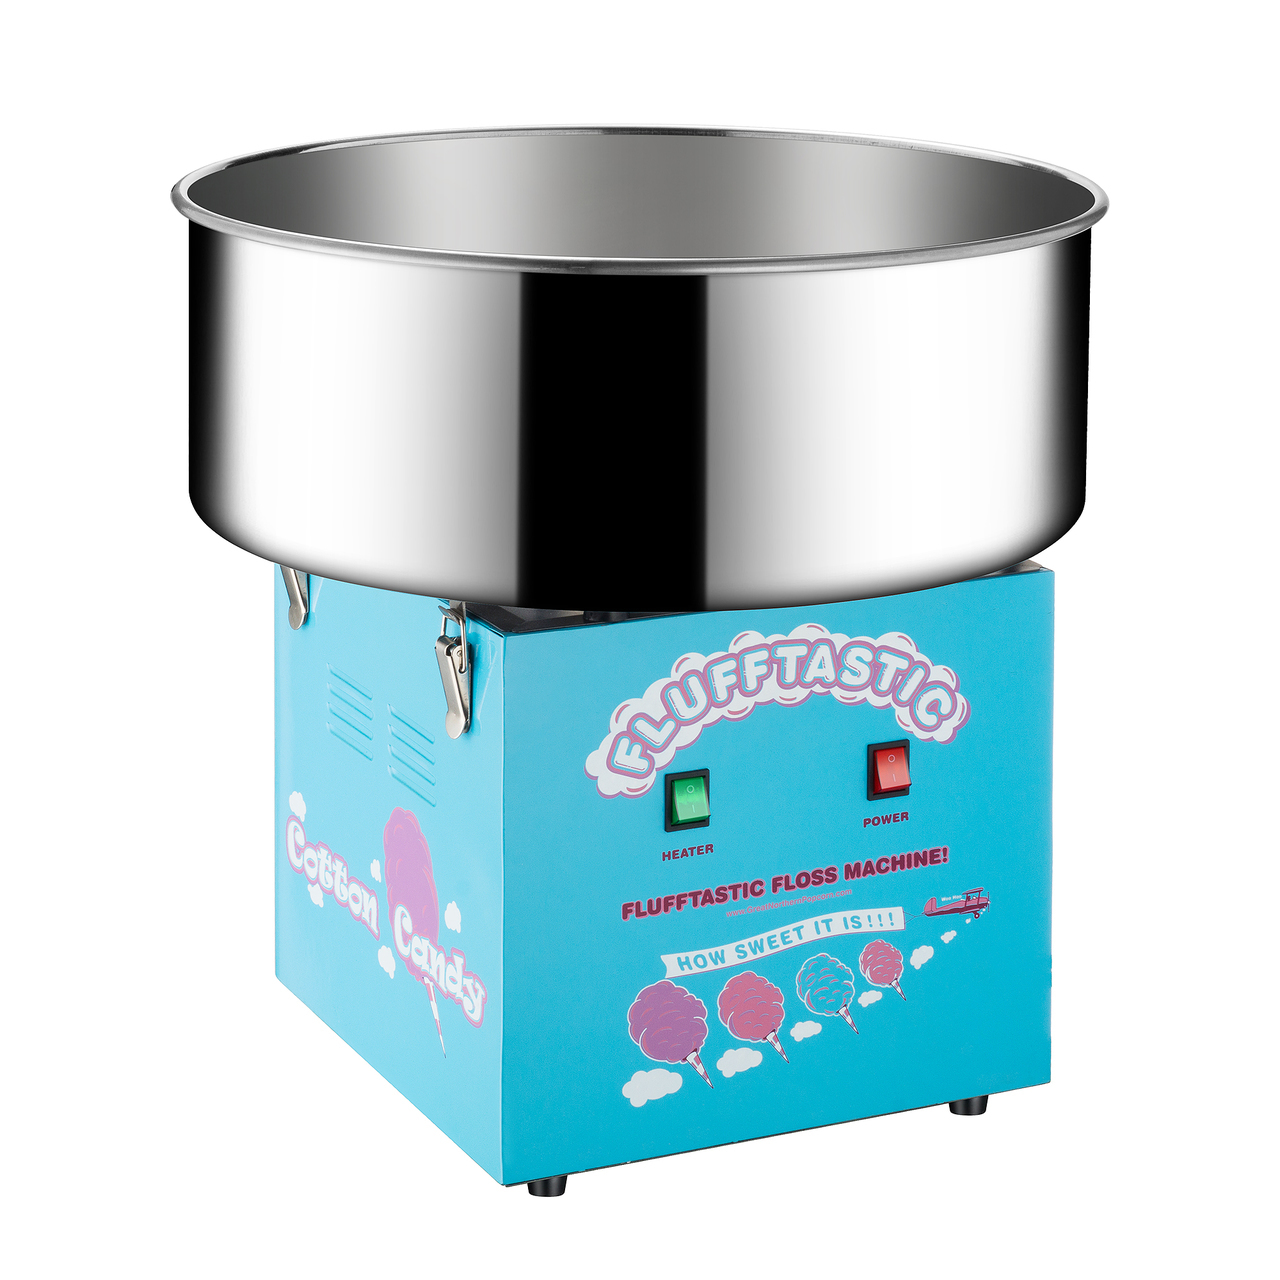 Cotton Candy - Cotton Candy Machines - Great Northern Popcorn